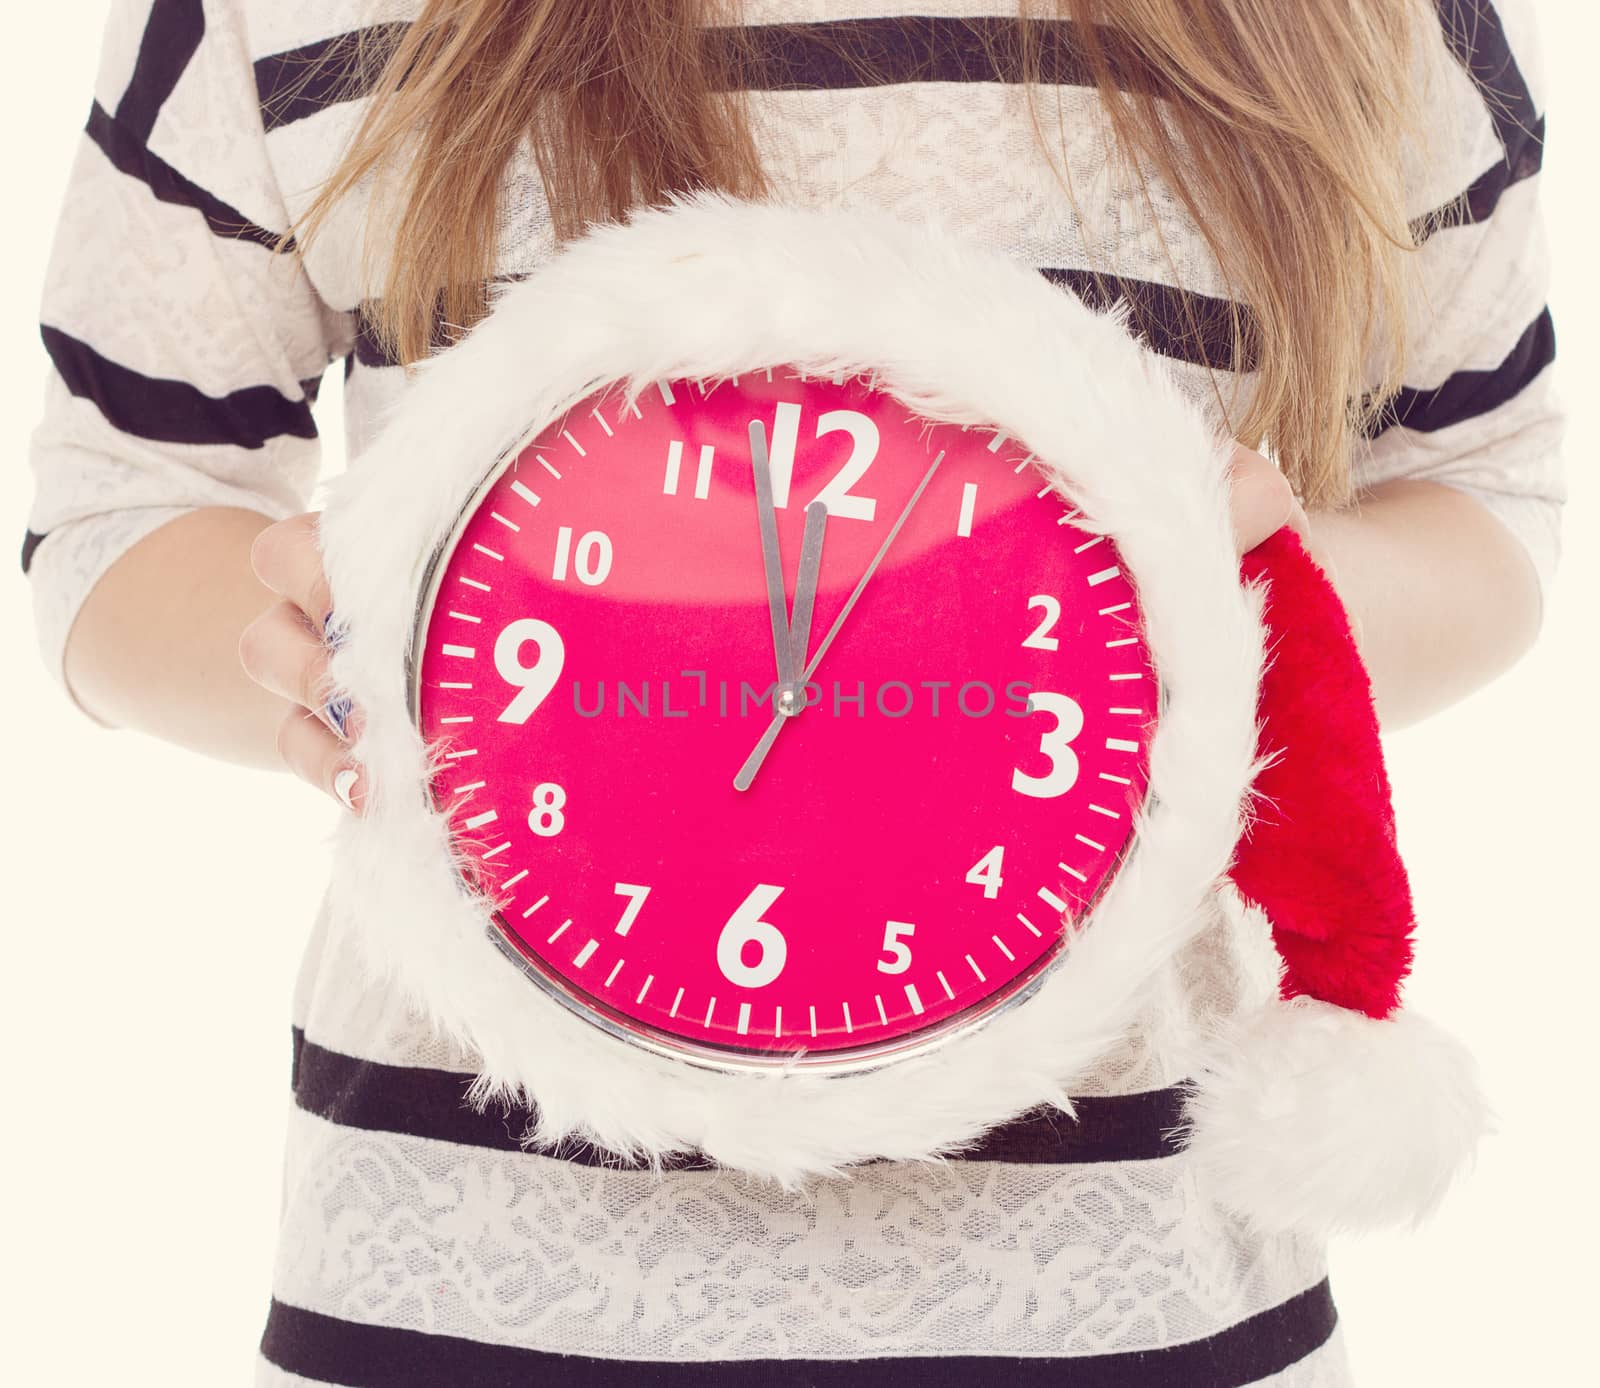 Big clocks a Christmas hat in female hands. New Year. 12 hours. toning by victosha